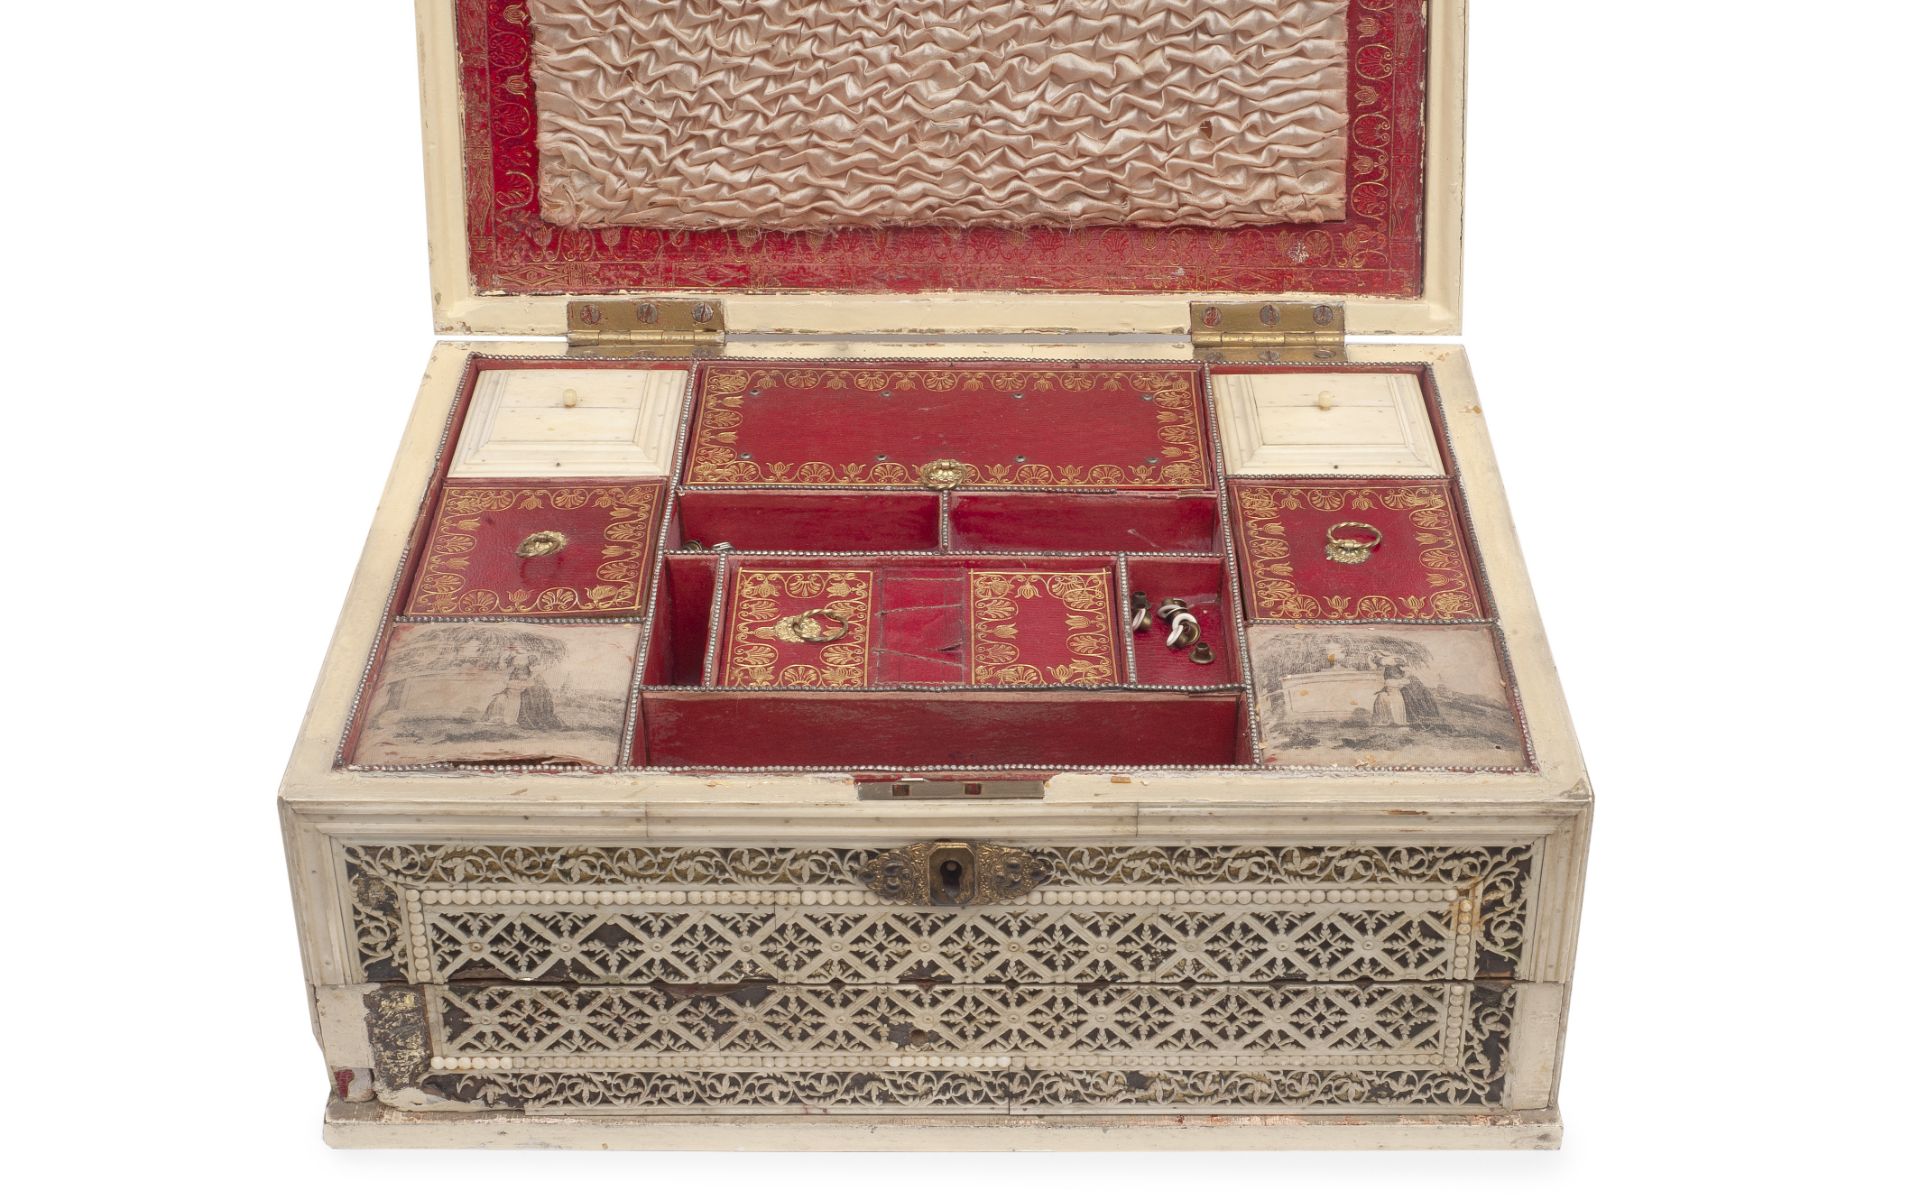 A LATE 18TH / EARLY 19TH CENTURY RUSSIAN BONE VENEERED CASKET, KHOLMOGORY - Image 5 of 5